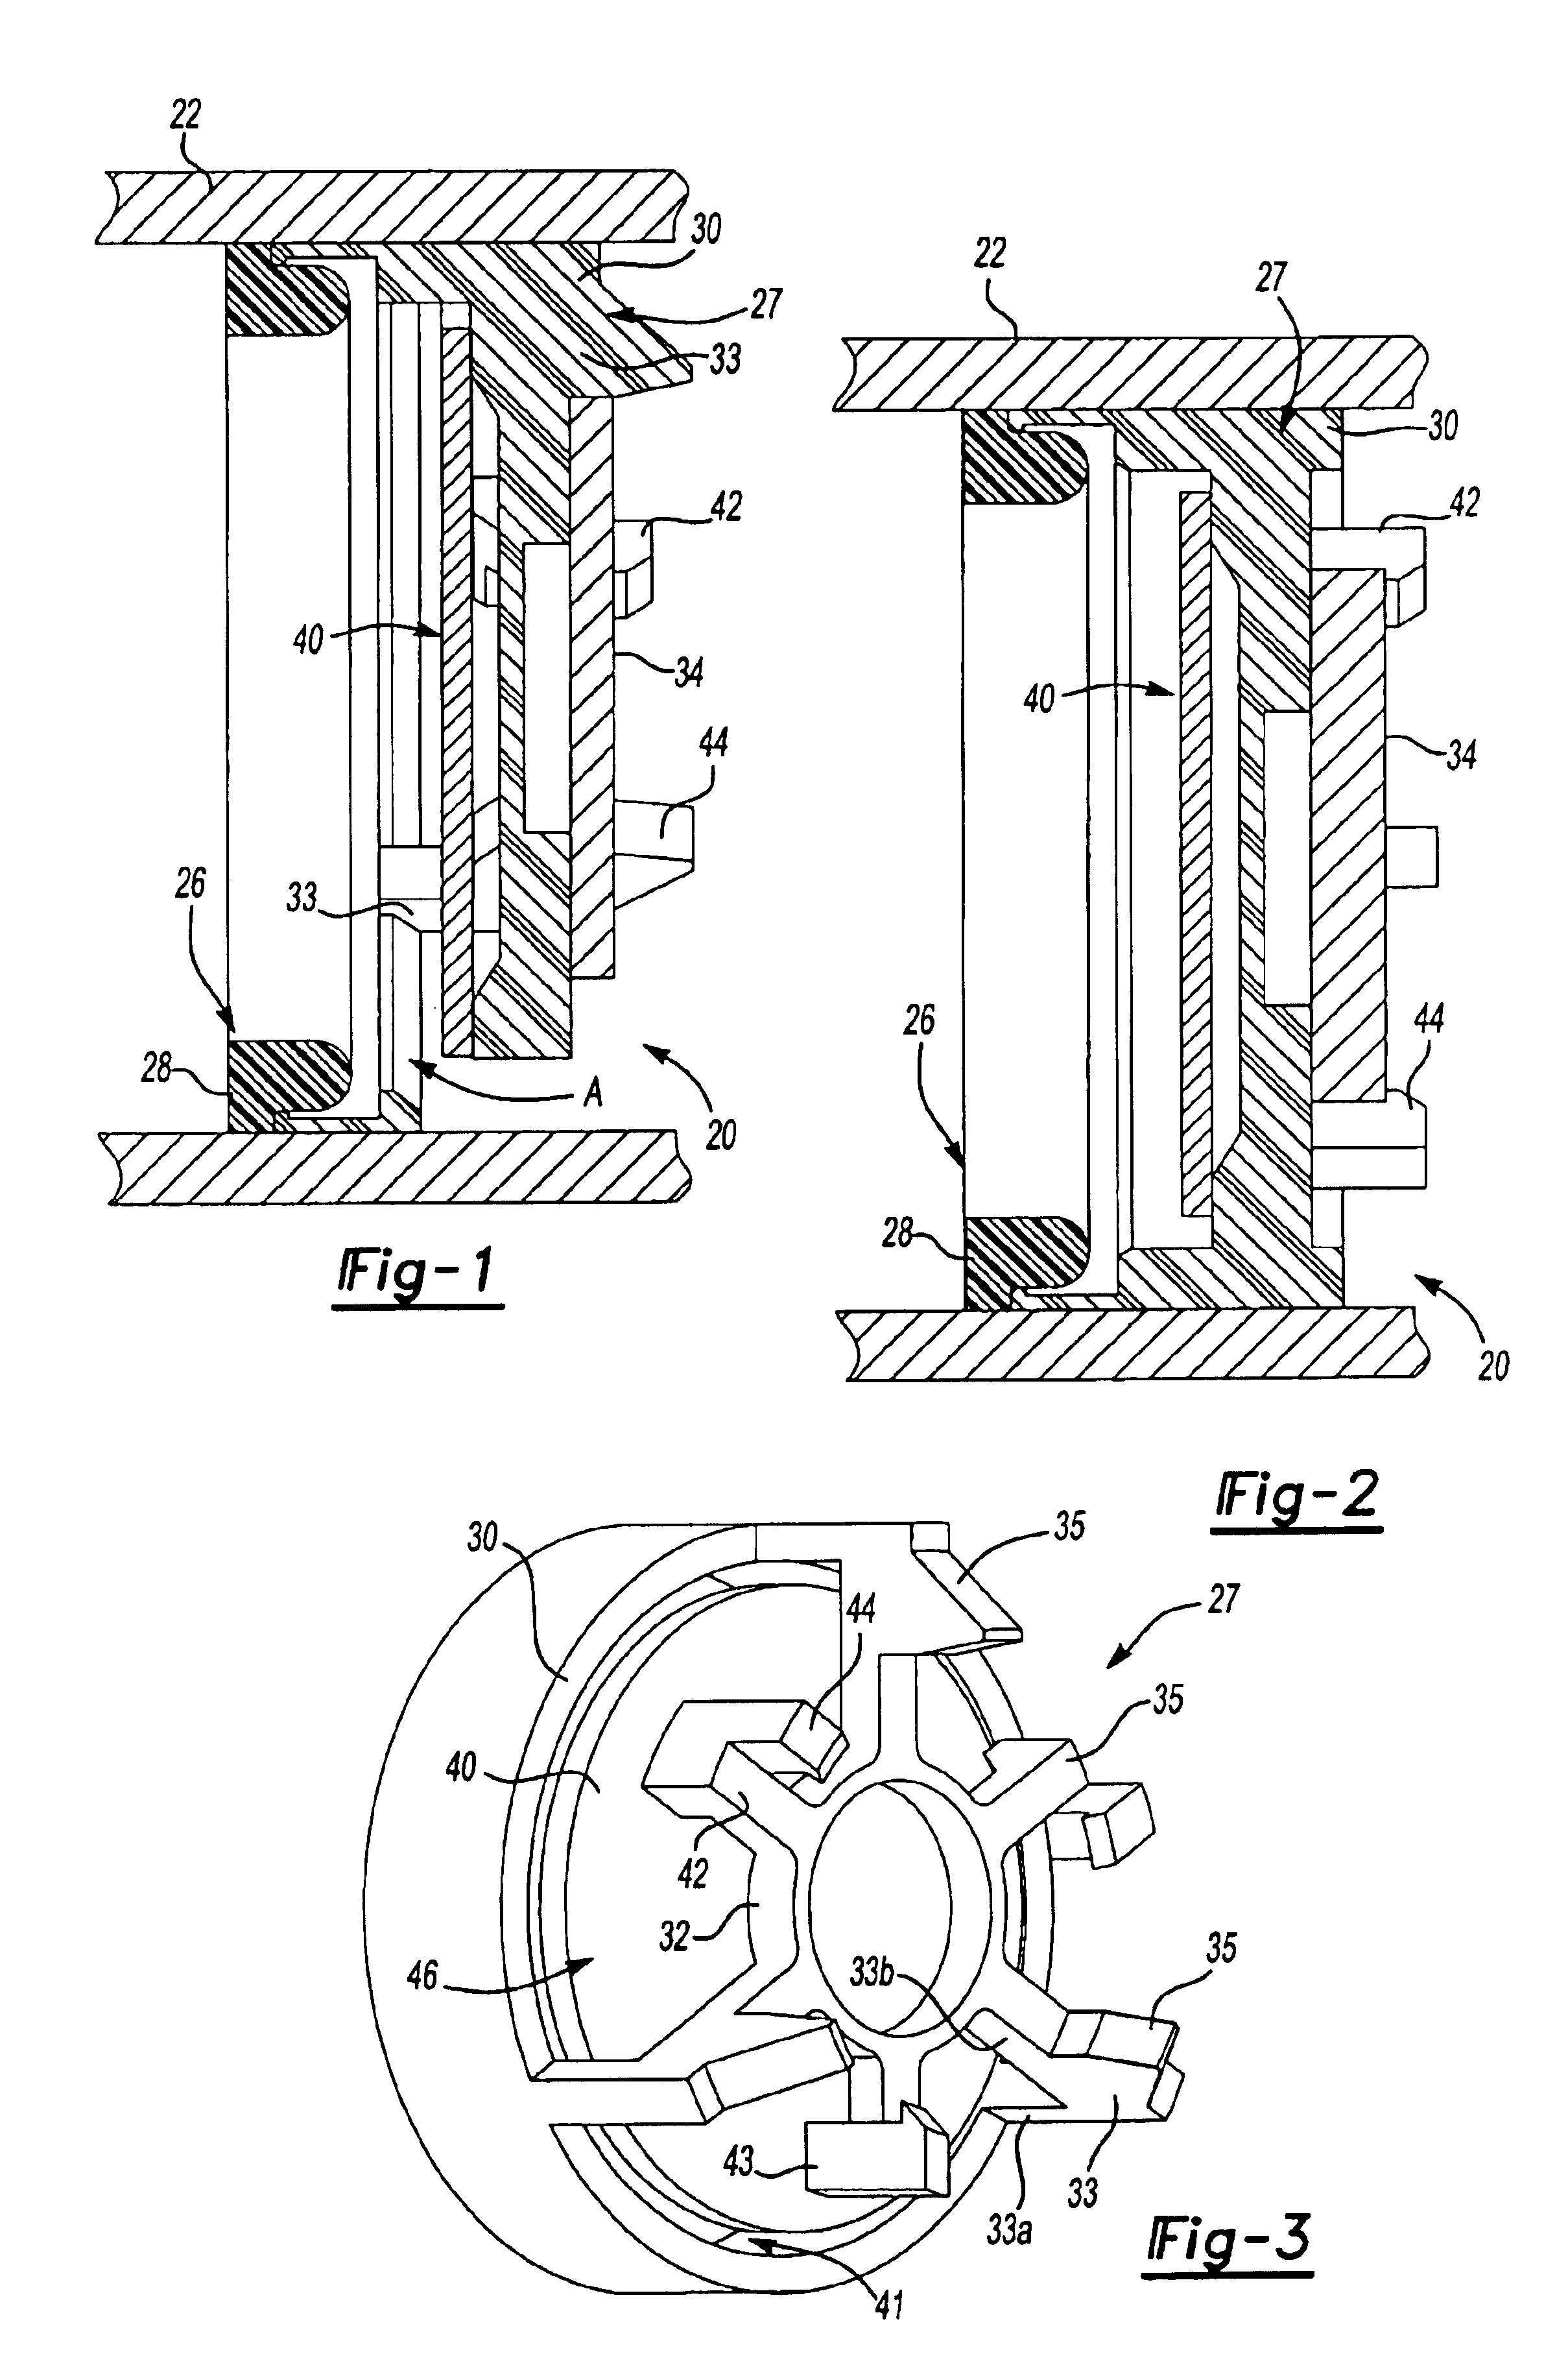 Excess flow valve with magnet